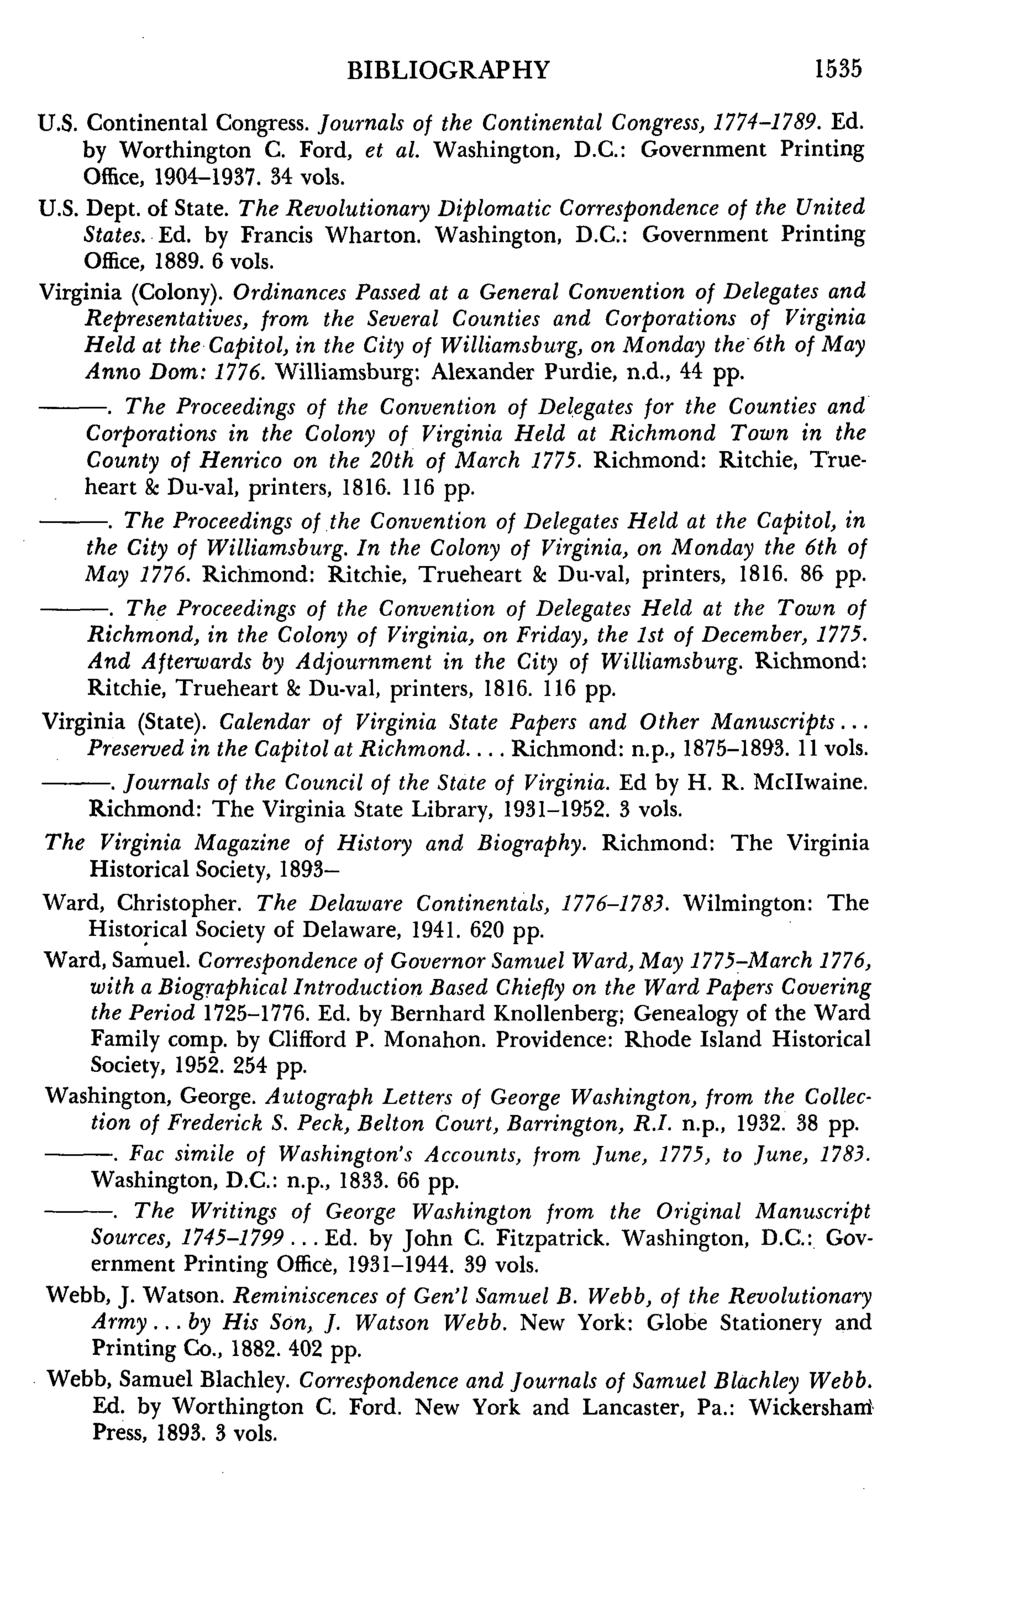 BIBLIOGRAPHY 1535 U.S. Continental Congress. Journals of the Continental Congress, 1774-1789. Ed. by Worthington C. Ford, et al. Washington, D.C.: Government Printing Office, 1904-1937. 34 vols. U.S. Dept.